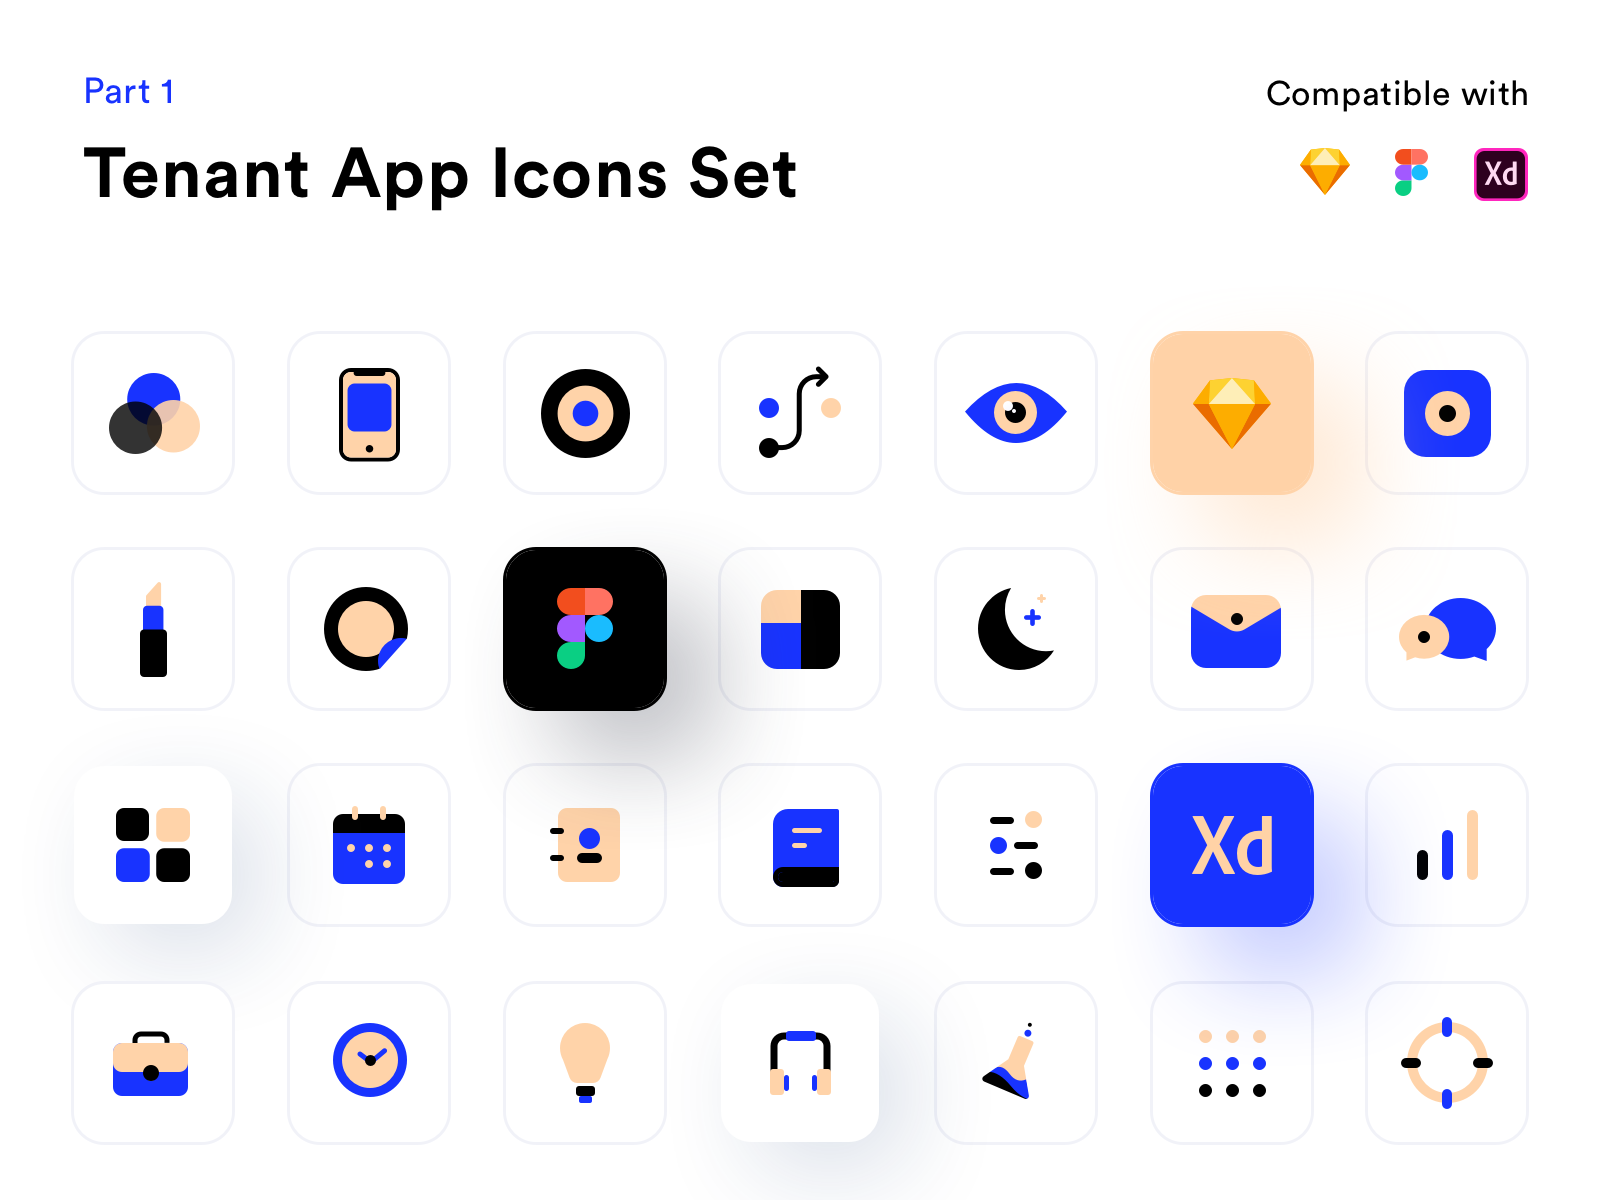 Tenant app icons set (Available for sell) chat dialpad mobile email figma goods graphics home house goal icon iconography icons illustraion neel prakhar safety security briefcase sell settings sharma sketch time clock vector xd